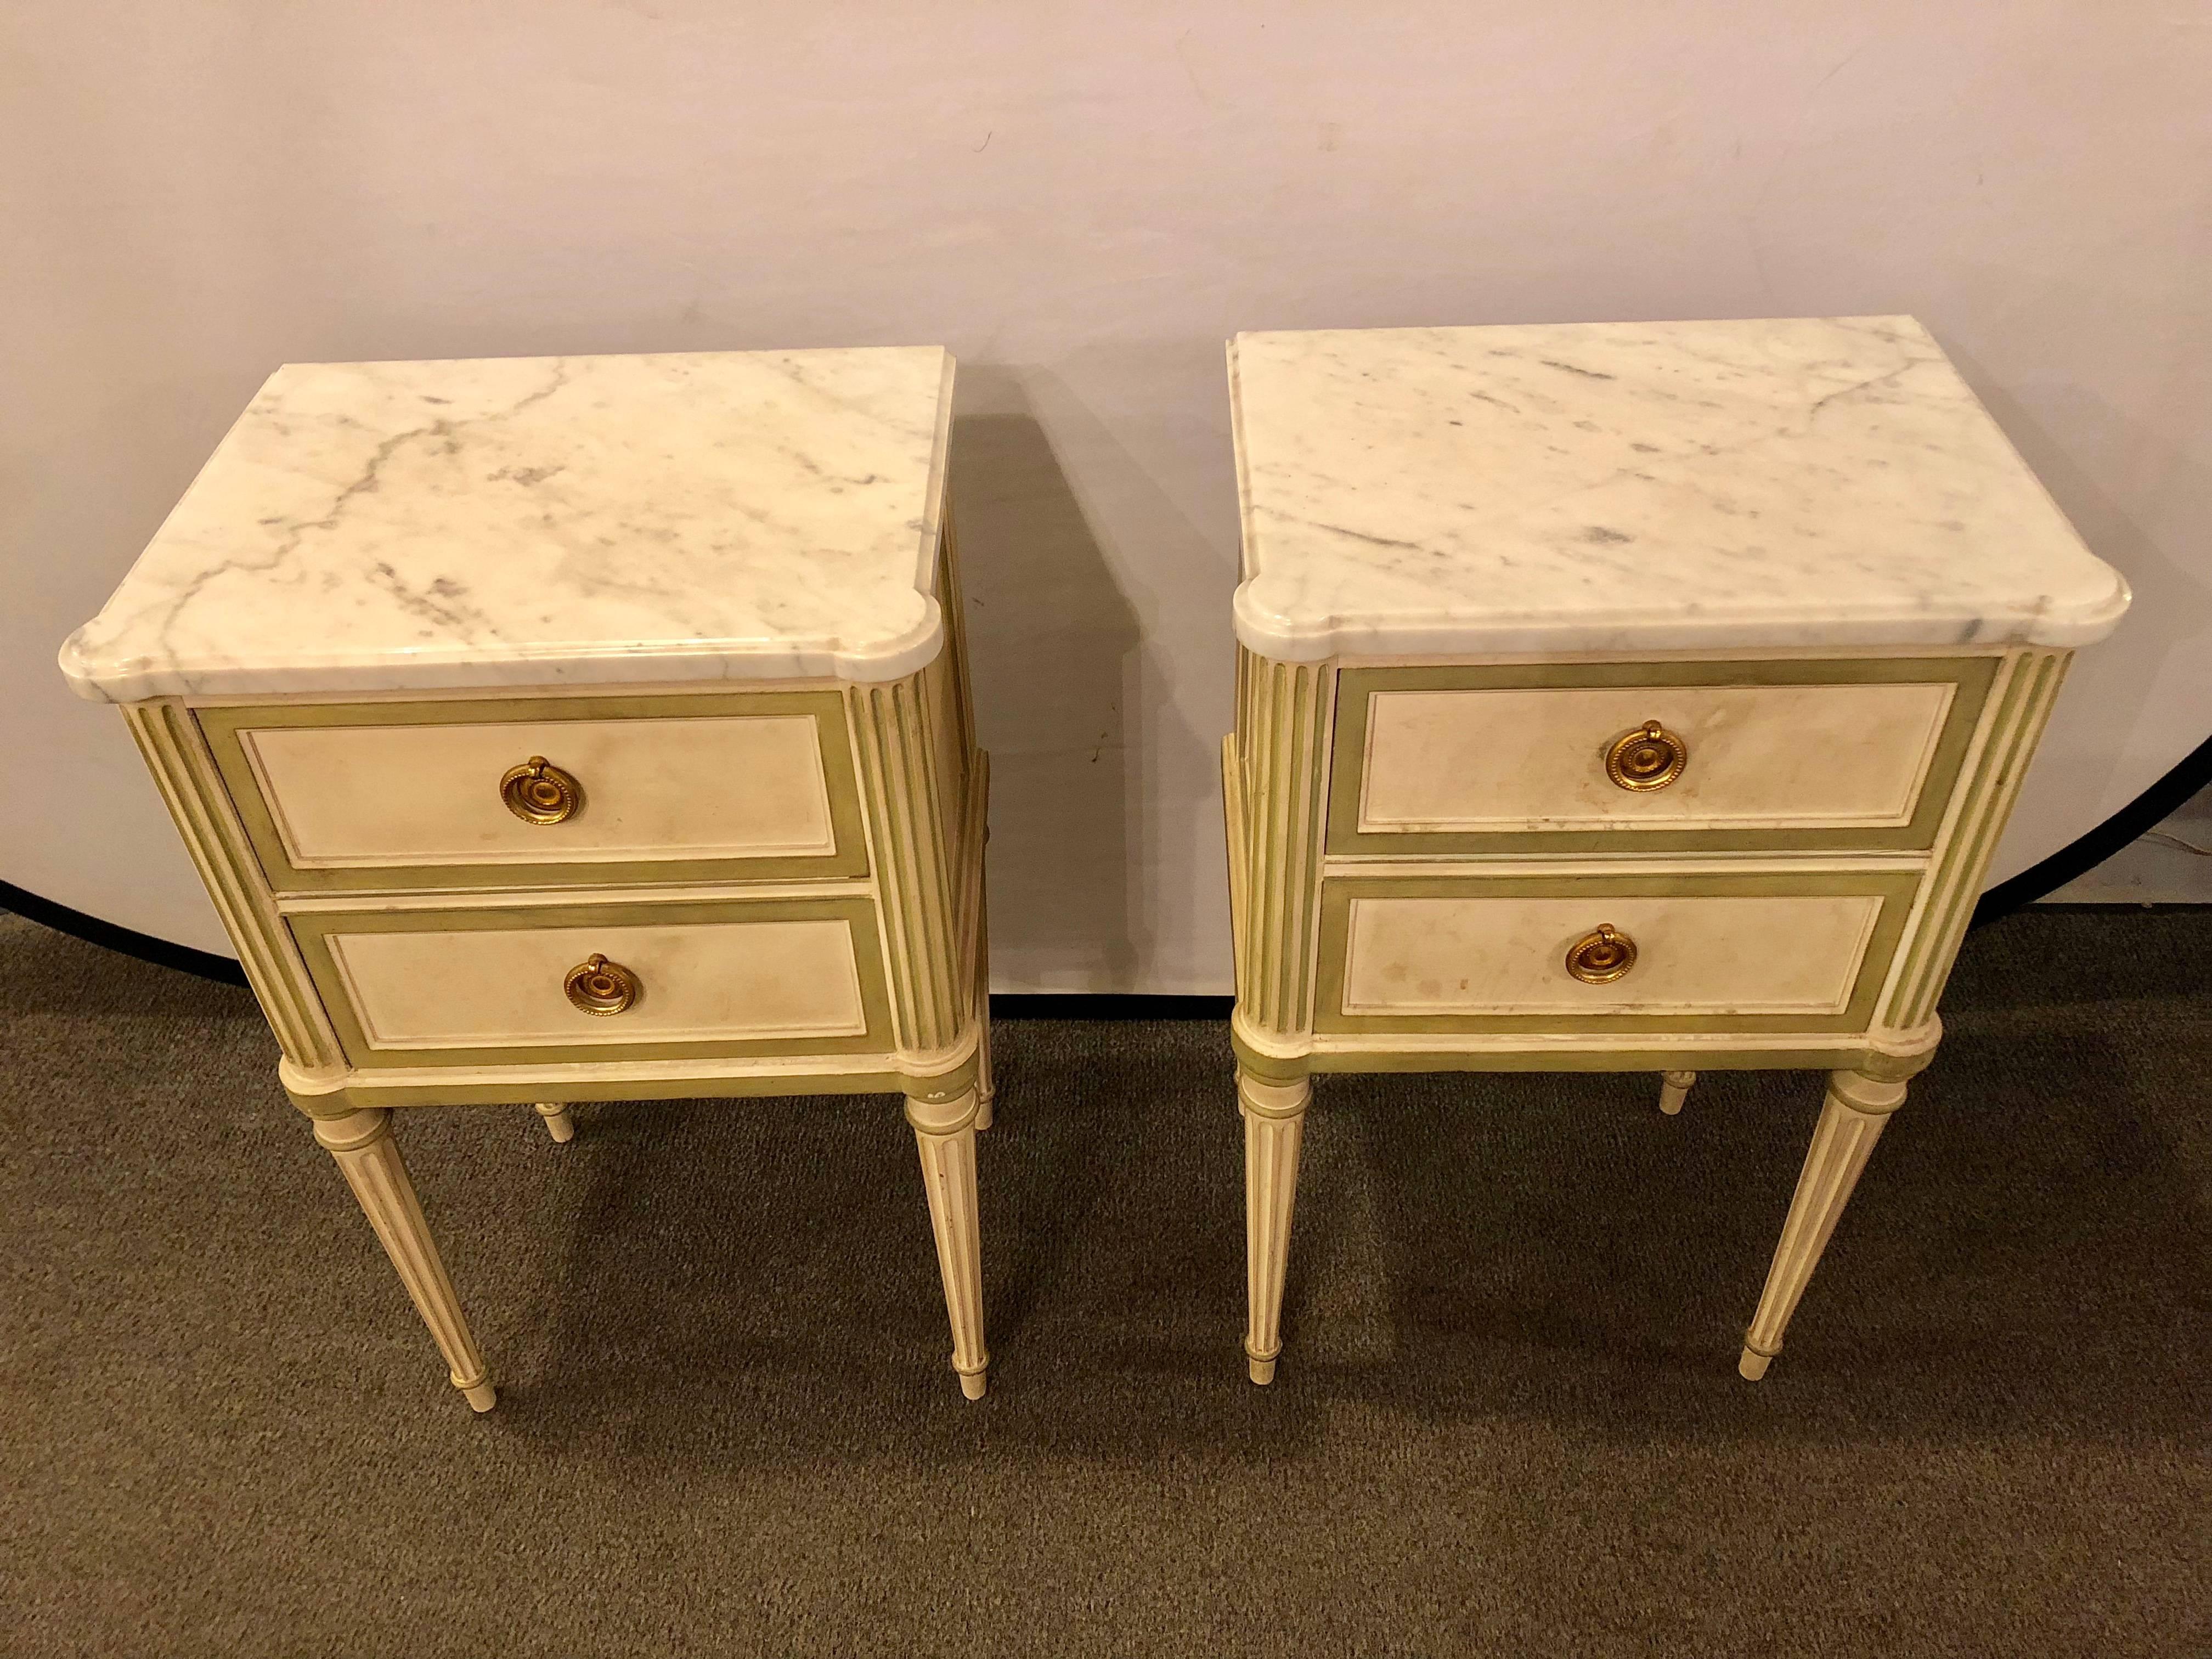 Hollywood Regency Pair of Louis XVI Style Paint Decorated Marble Top End Tables or Nightstands